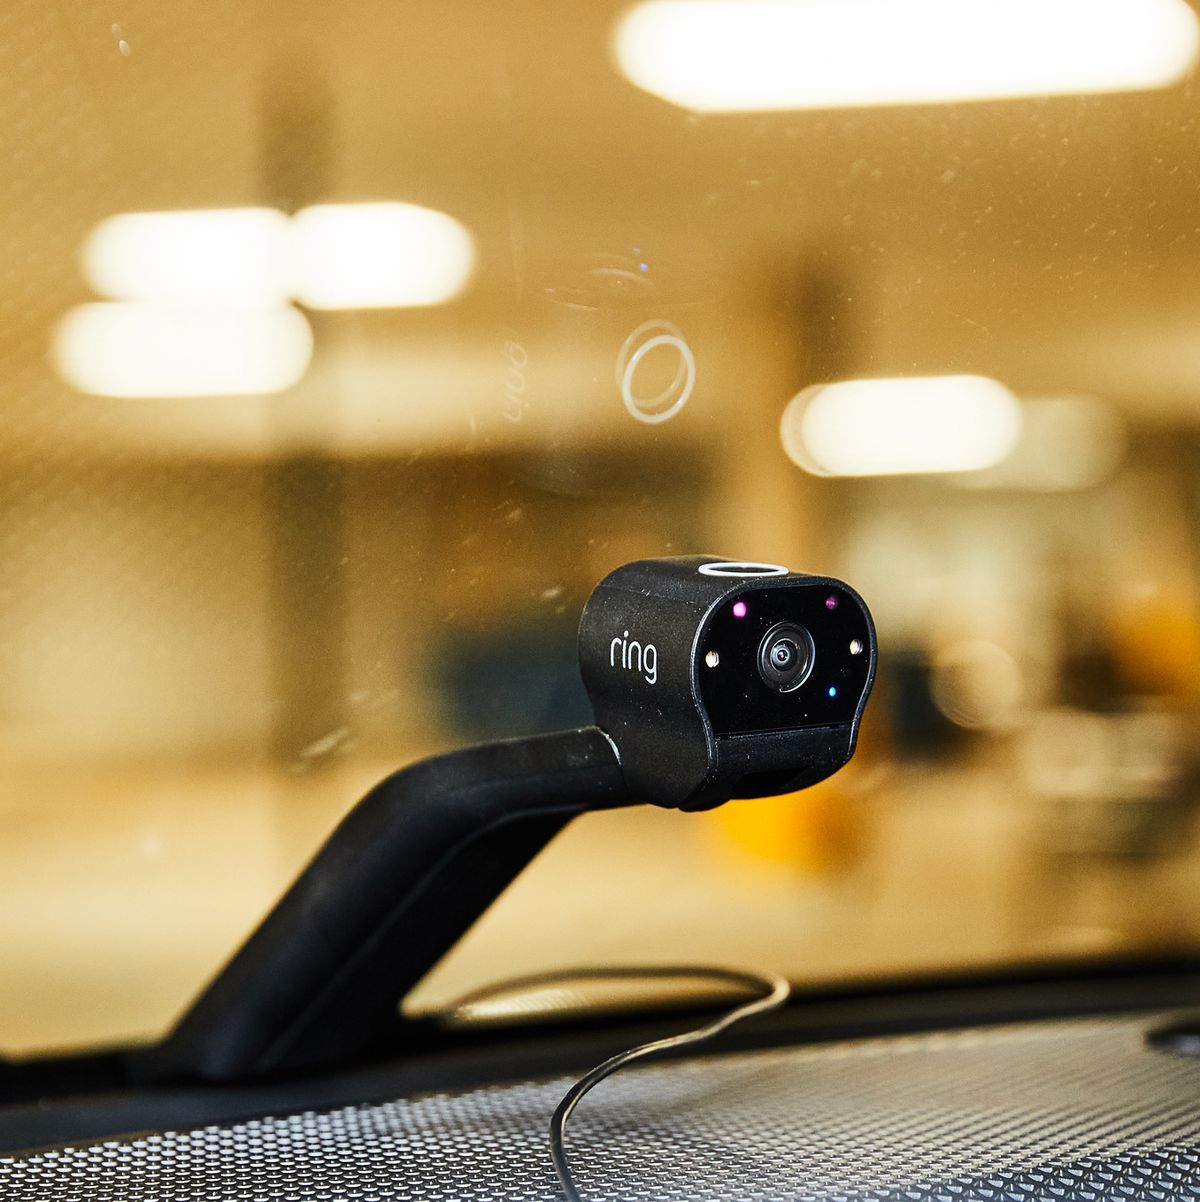 Ring Car Cam Review: Connected Dash Cam Protects at Home or Away - CNET